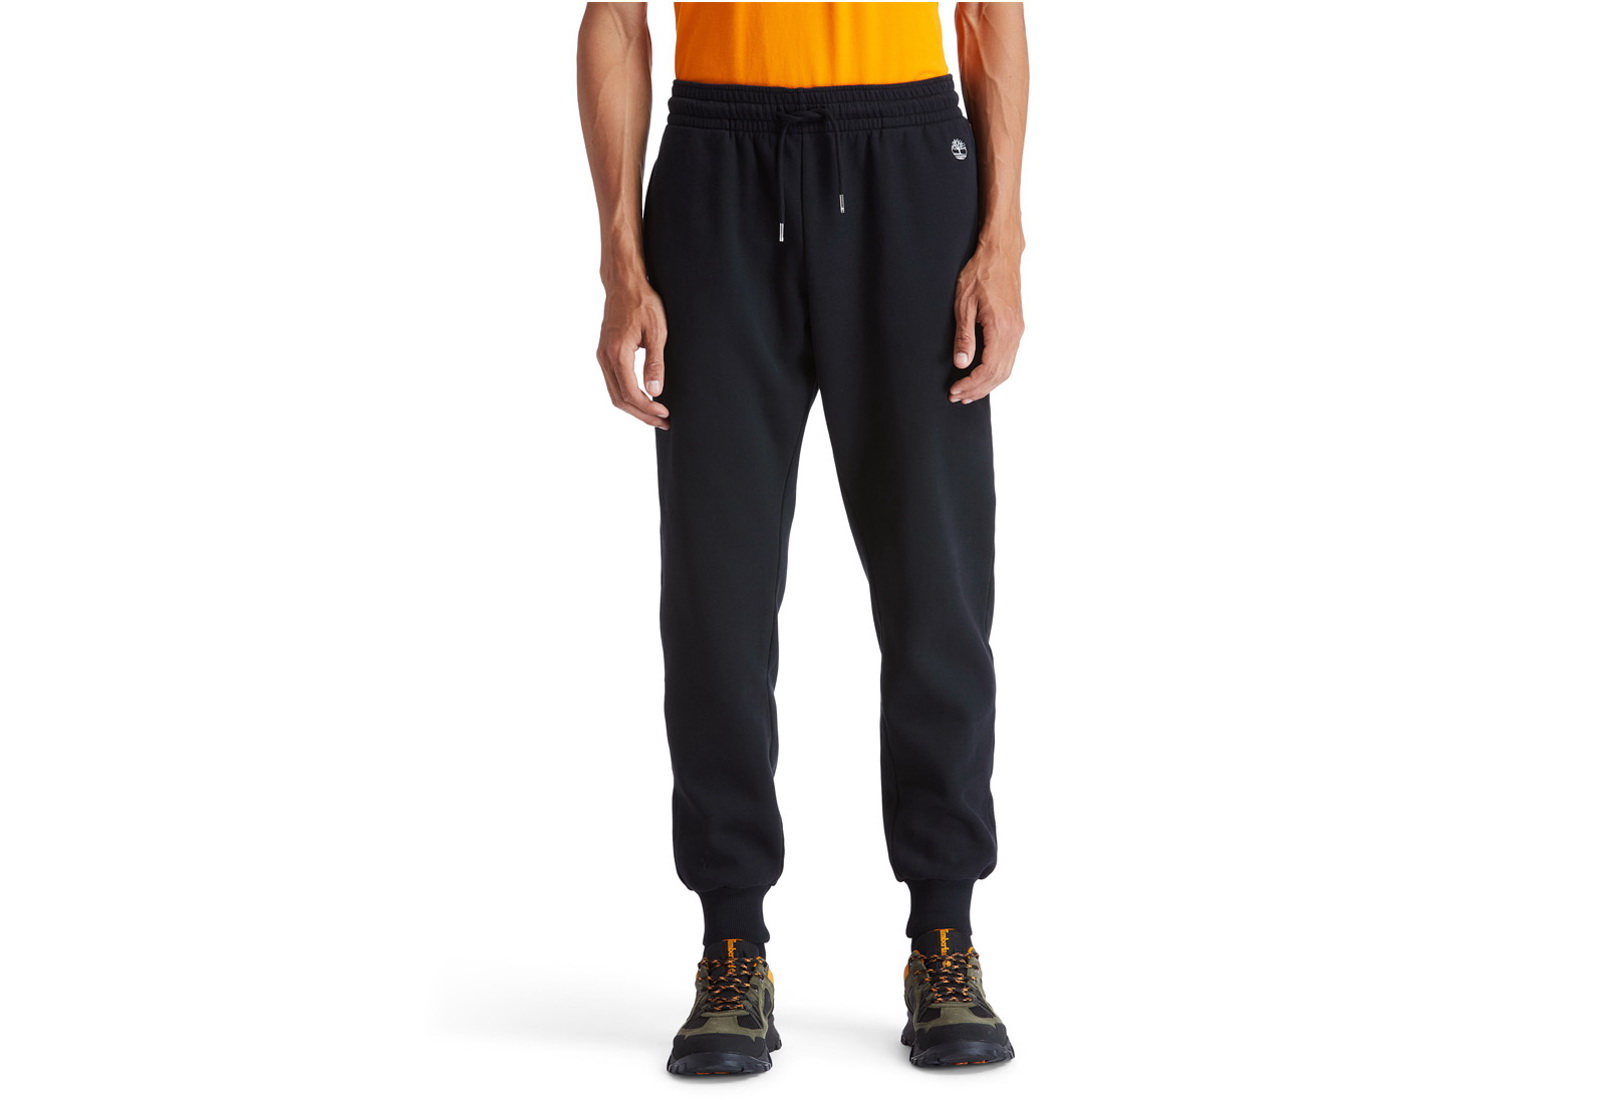 Timberland Oblečenie Exeter Sweatpant